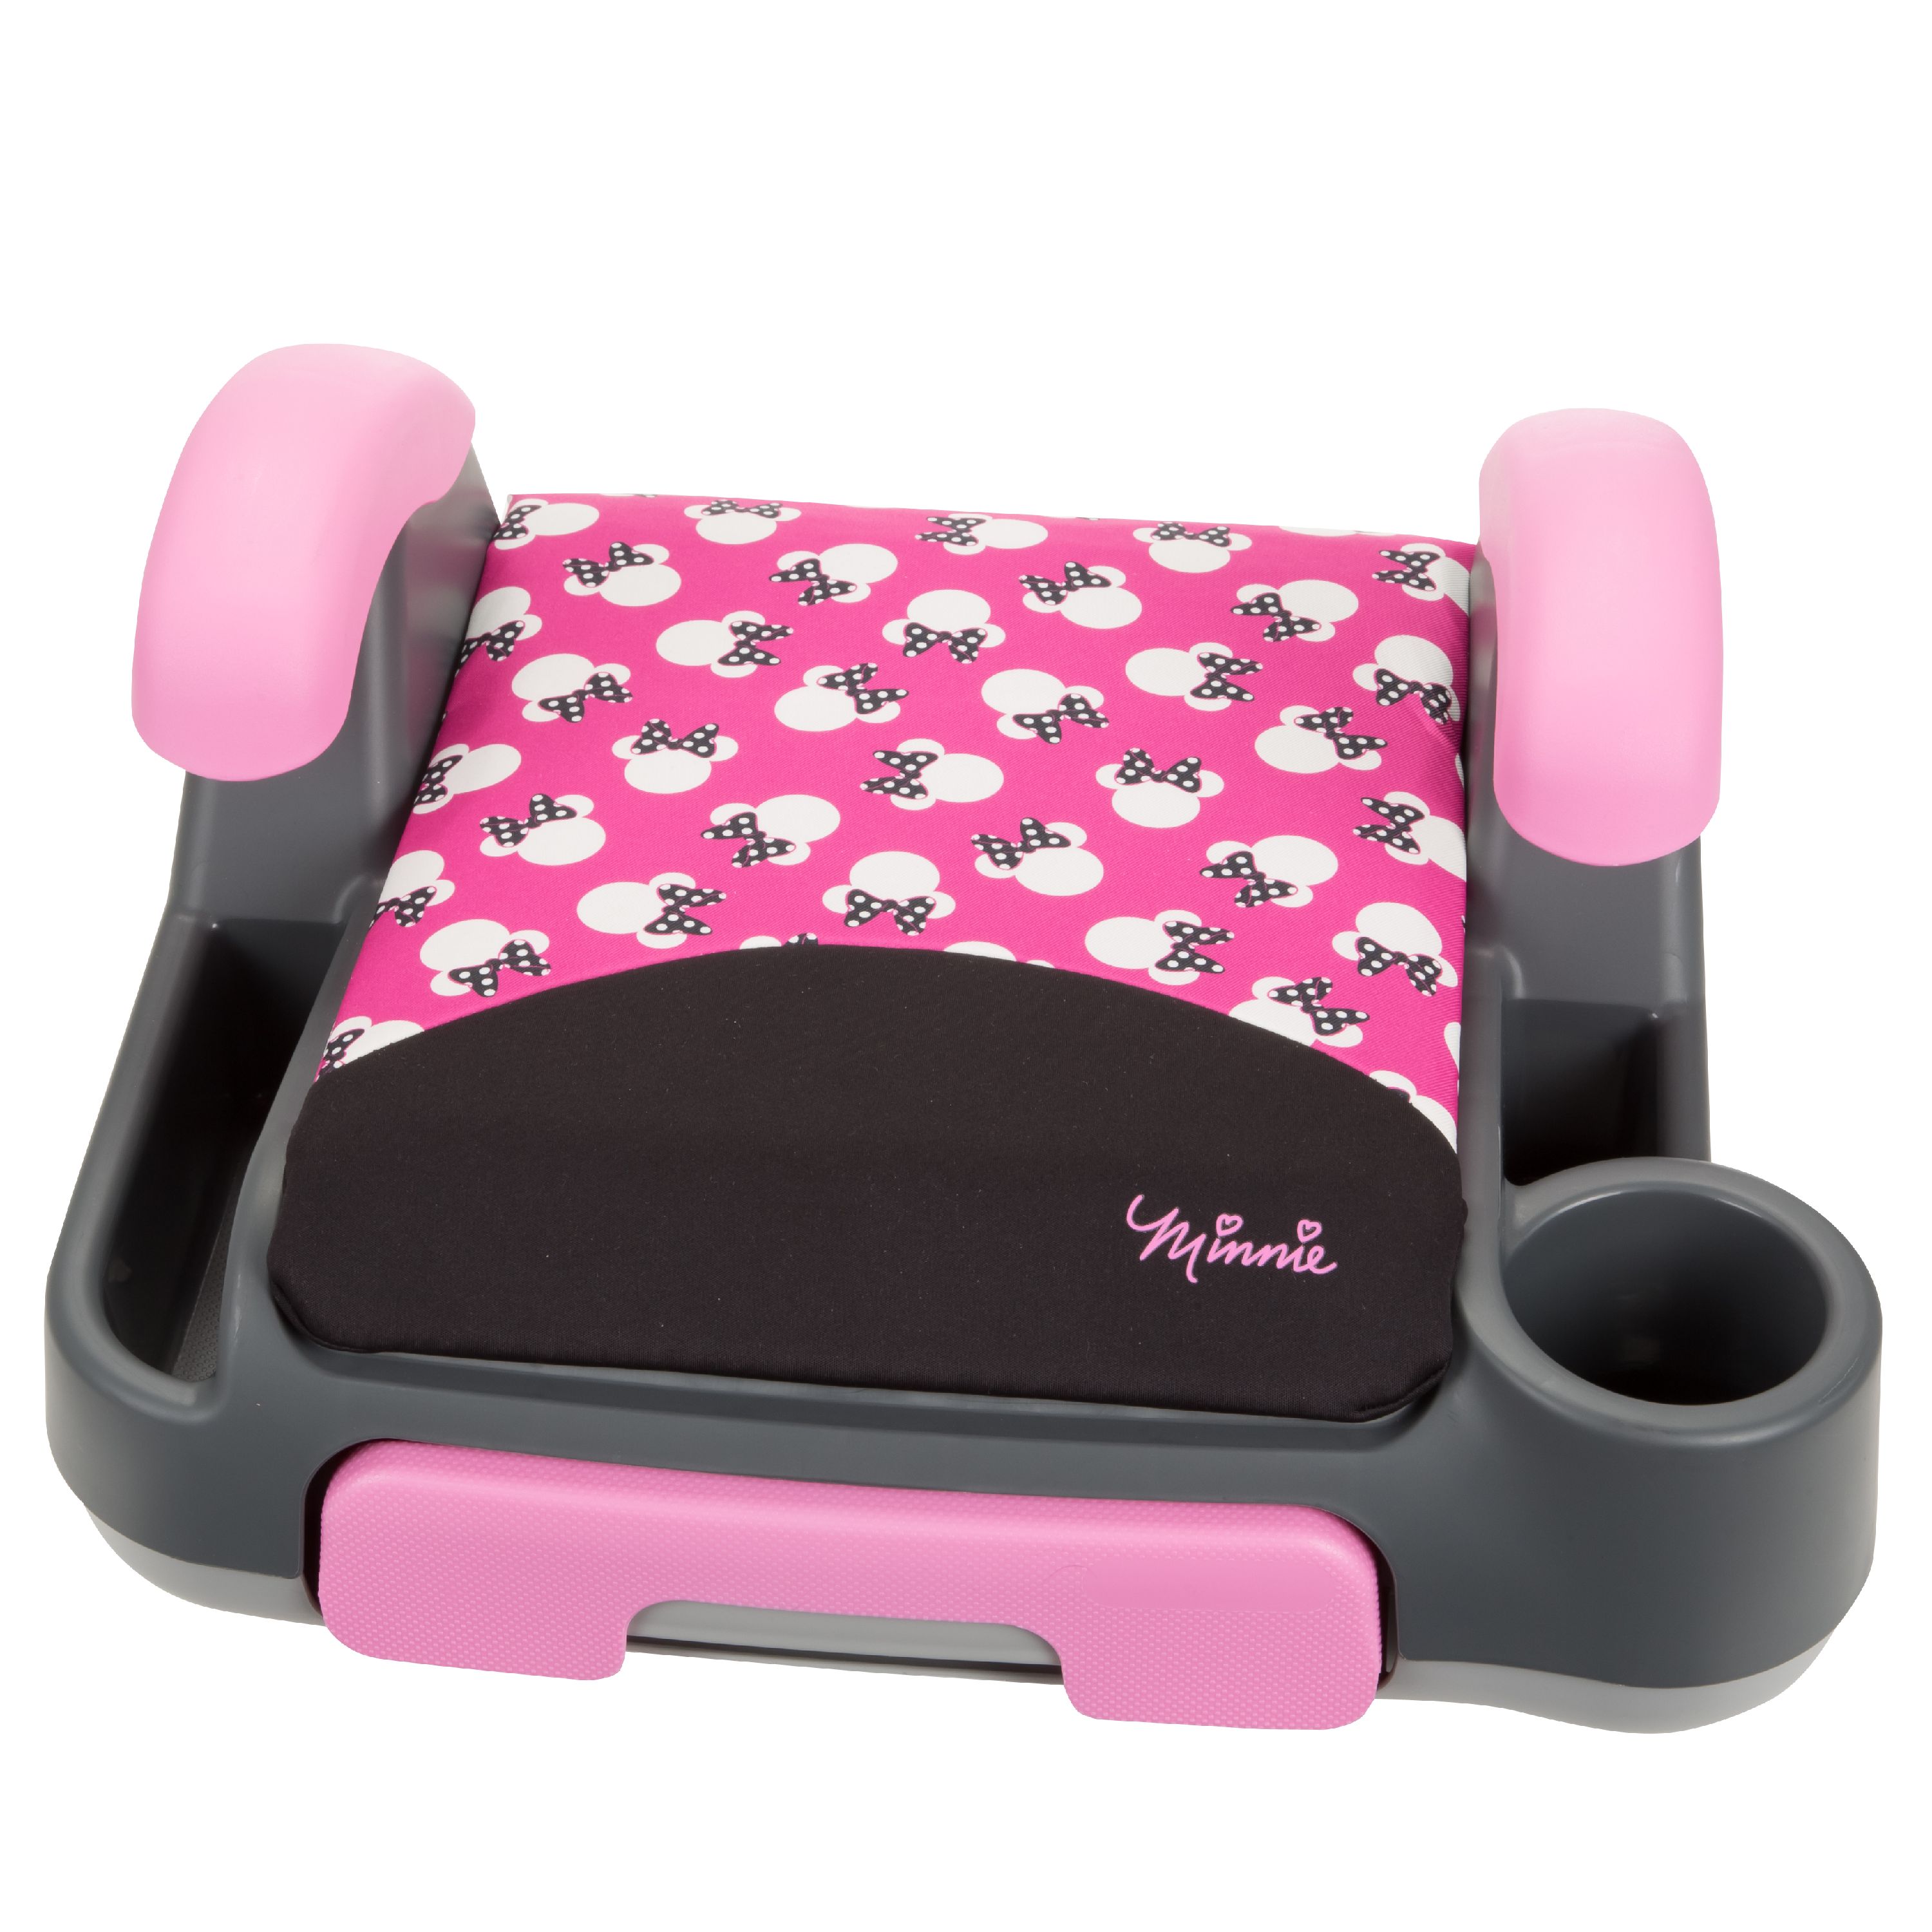 Disney Store 'n Go Backless Booster Car Seat, Minnie Silhouette Pink - image 4 of 7